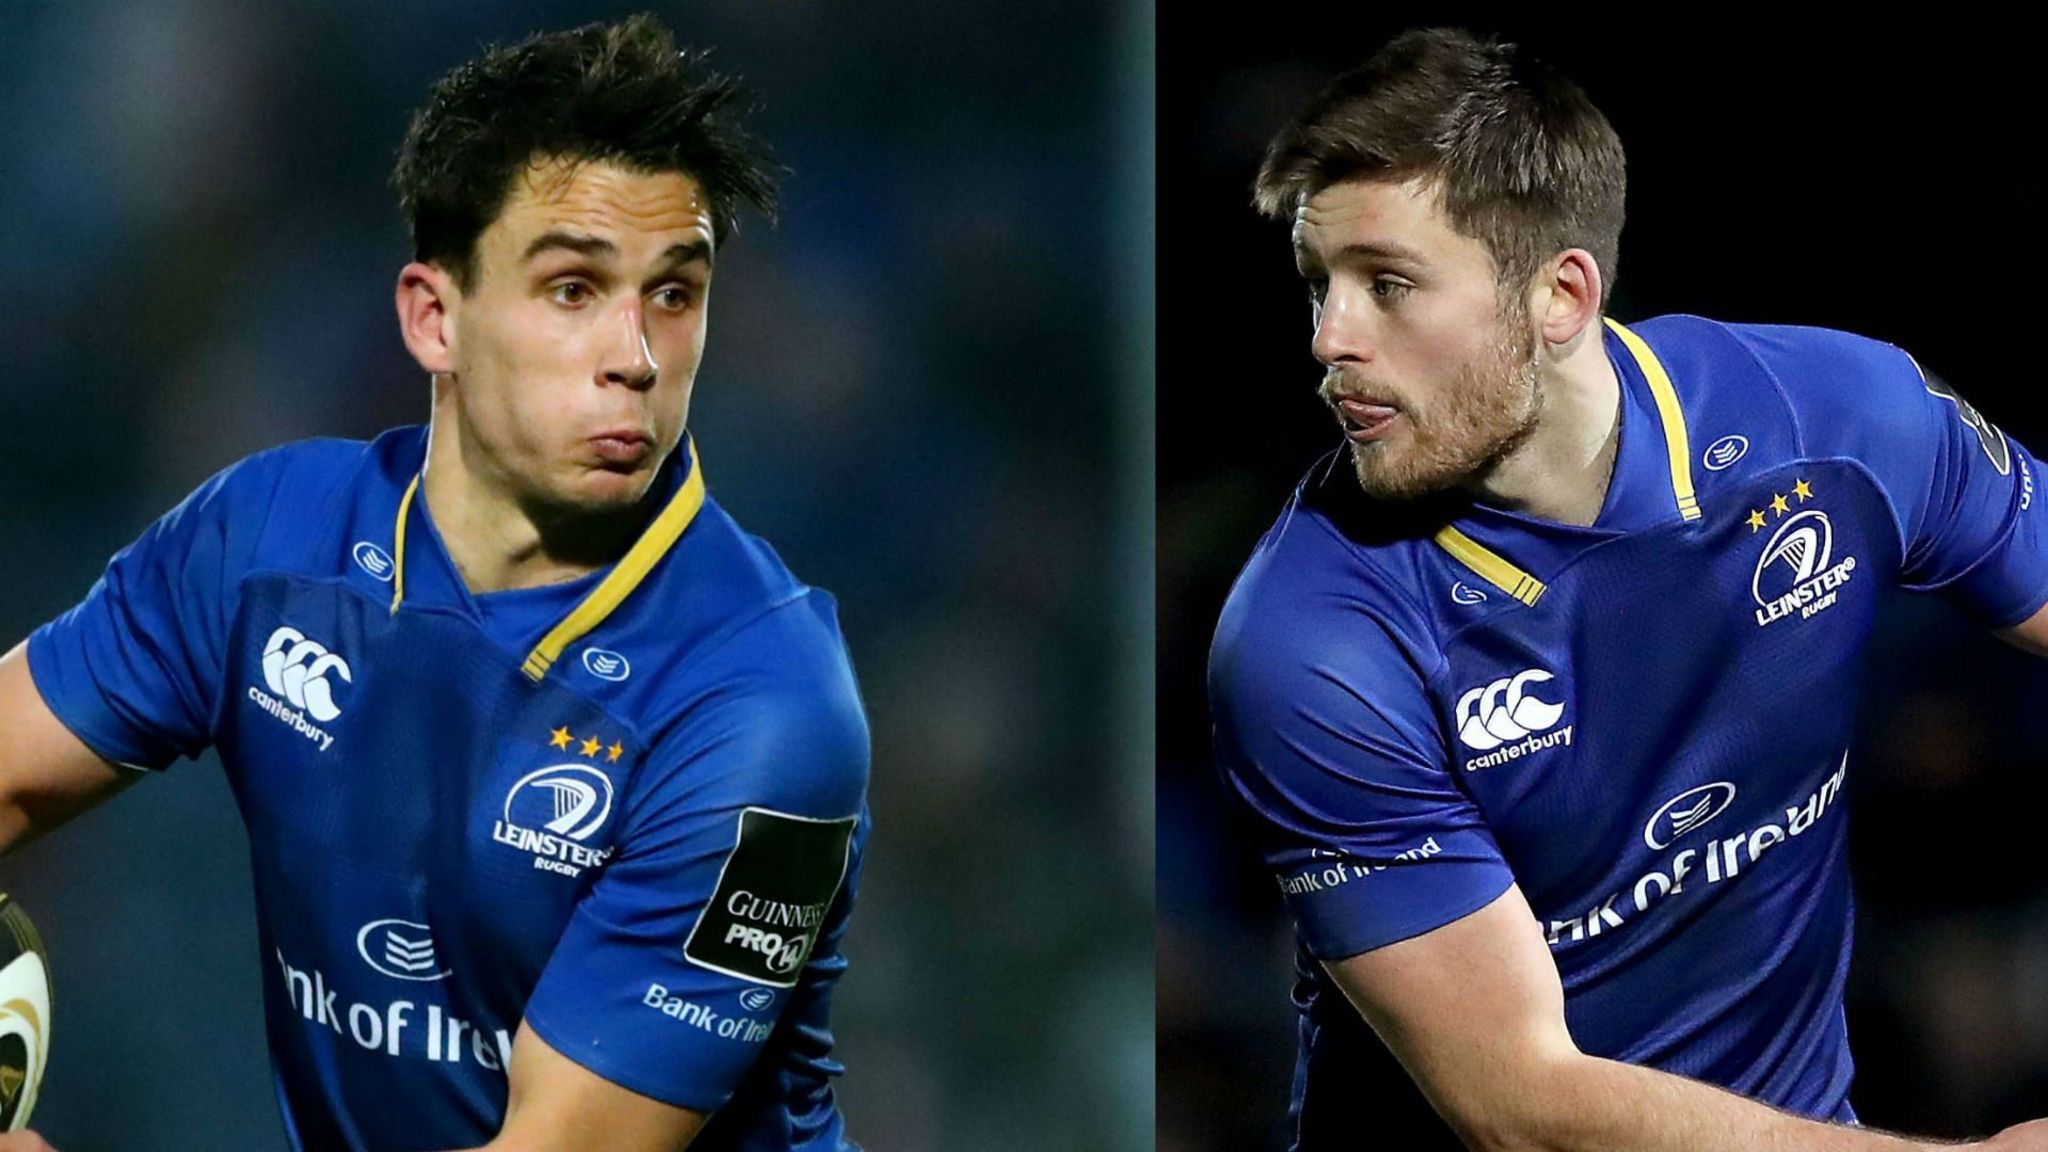 Joey Carbery and Ross Byrne